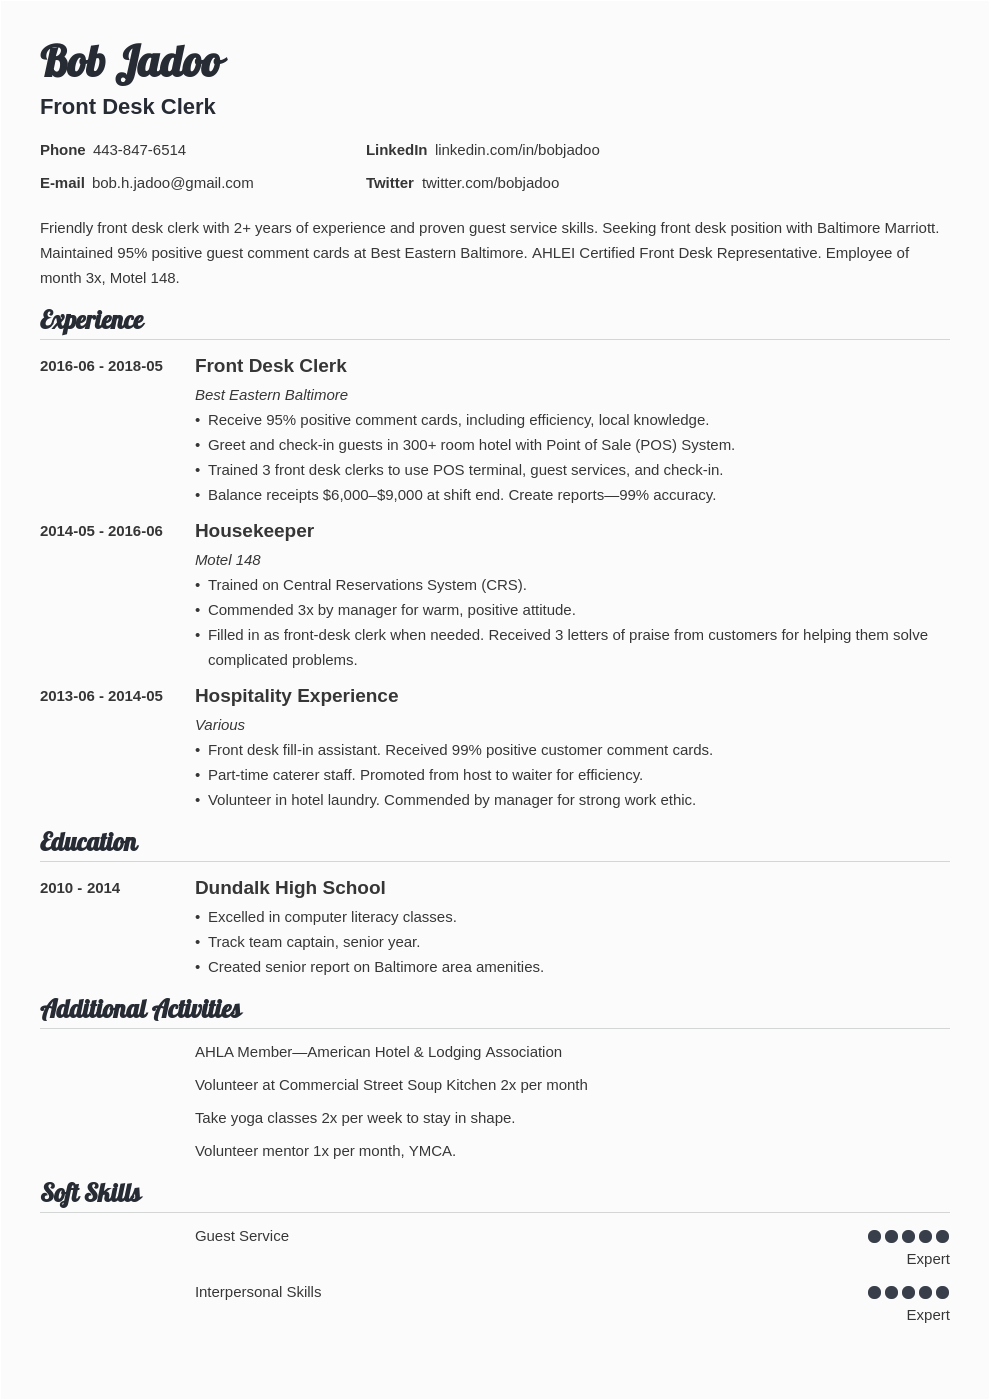 Sample Objective In Resume for Hospitality Industry Hospitality Resume Examples [ Objective & Skills]